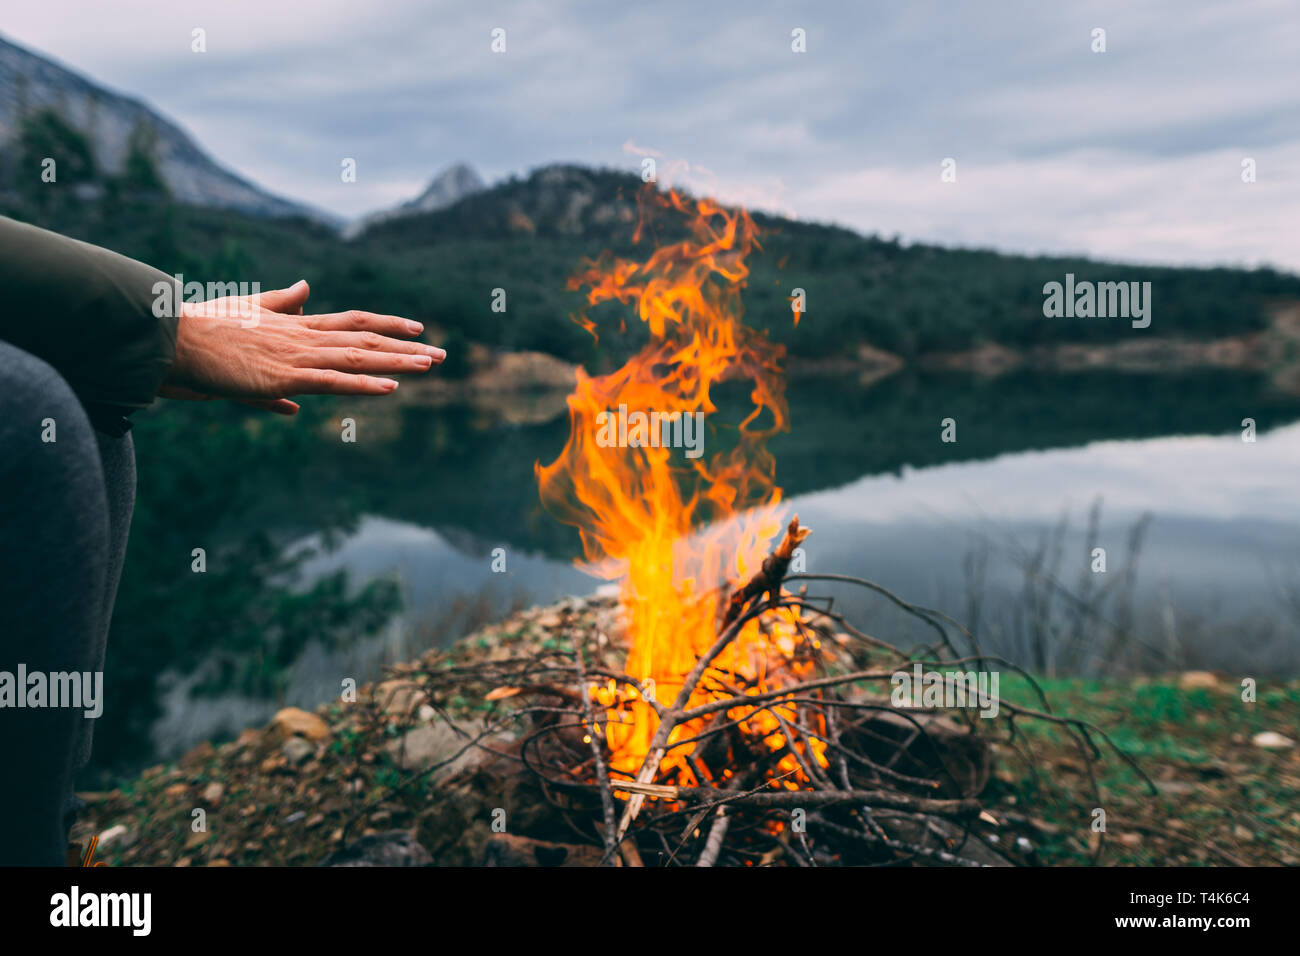 Hands of young woman warming up by camp fire.Body parts of adult female at nature. Camping. Stock Photo